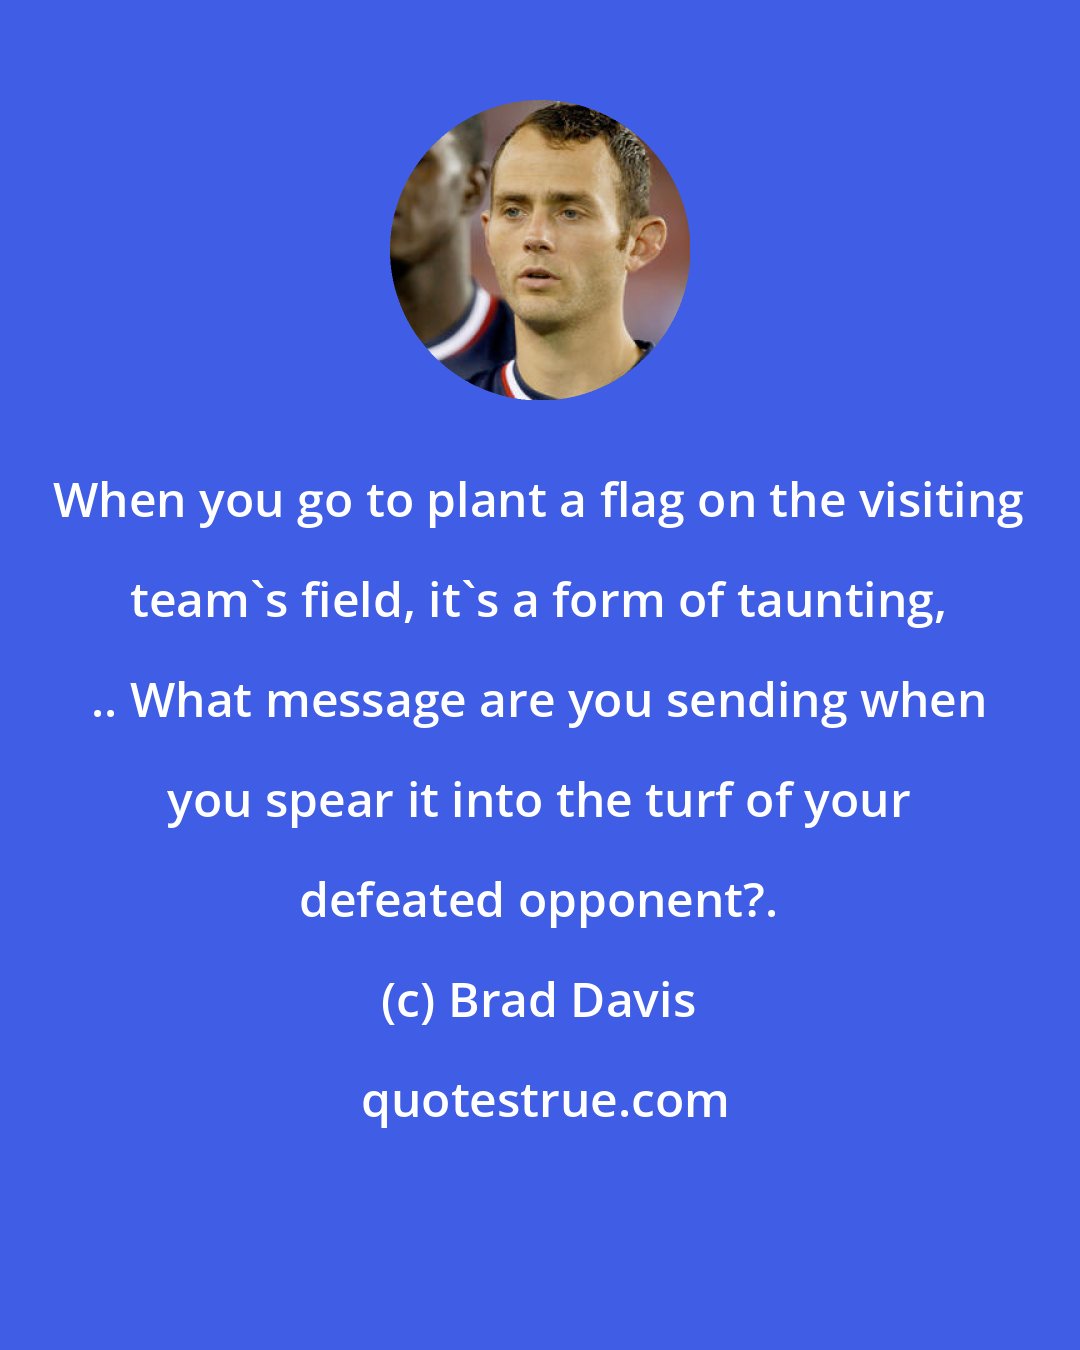 Brad Davis: When you go to plant a flag on the visiting team's field, it's a form of taunting, .. What message are you sending when you spear it into the turf of your defeated opponent?.